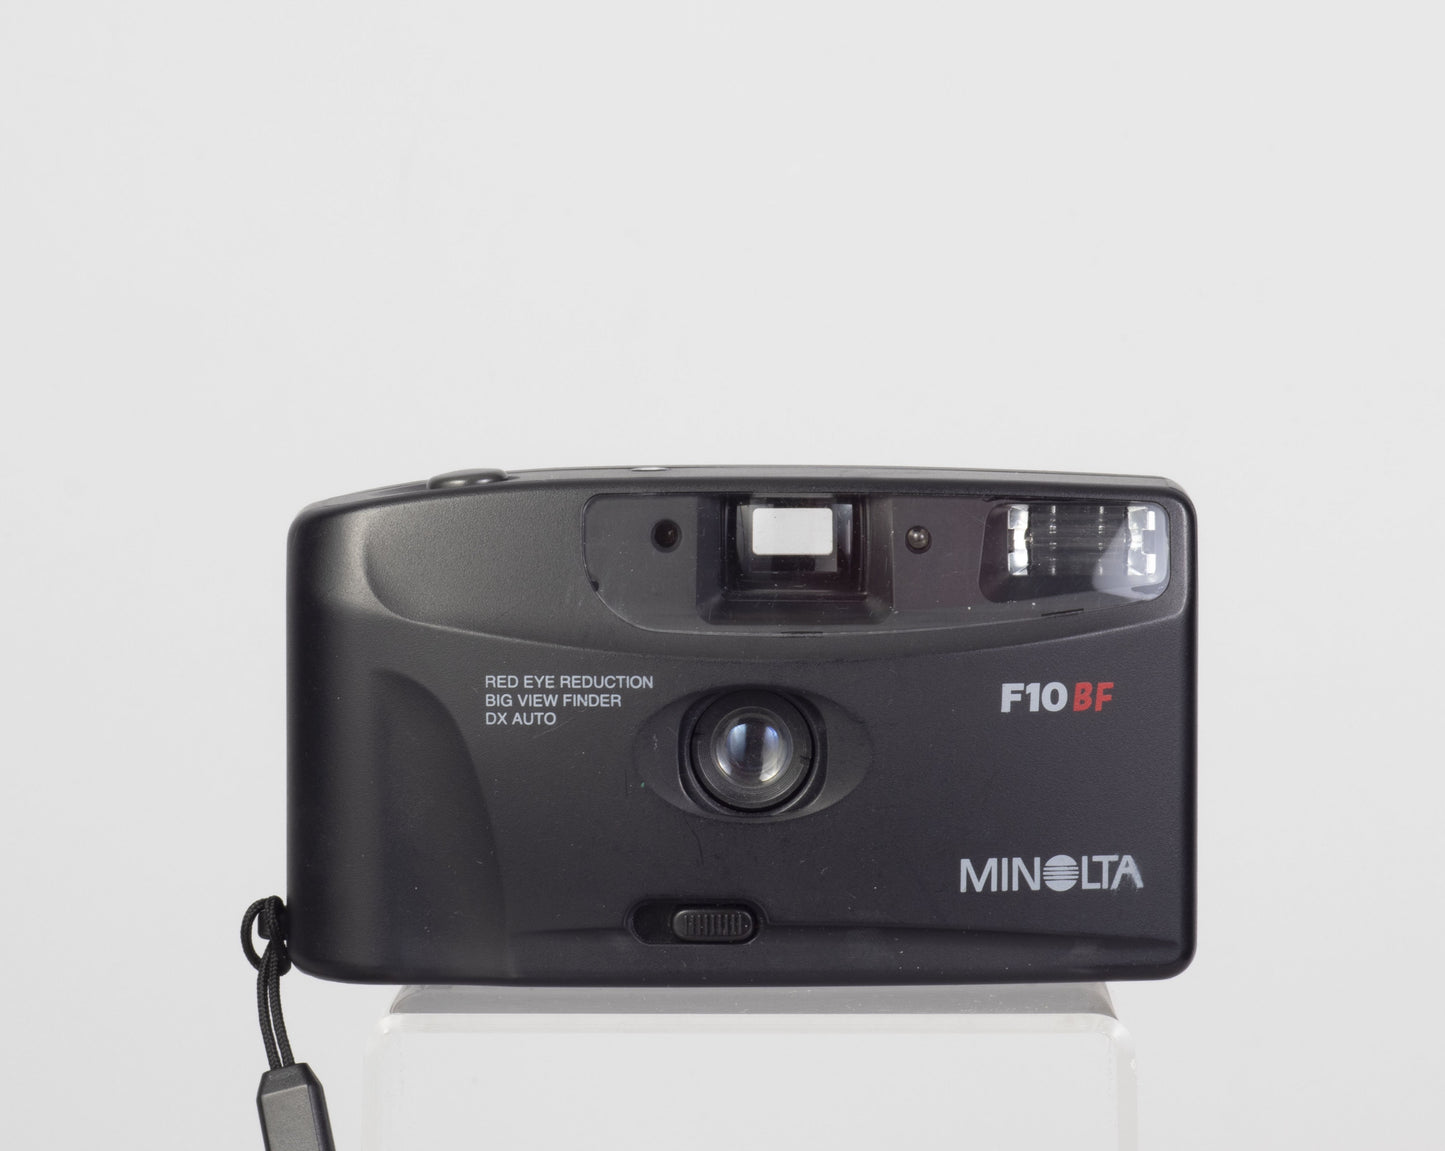 The Minolta F10 BF is a simple 35mm film point-and-shoot camera 